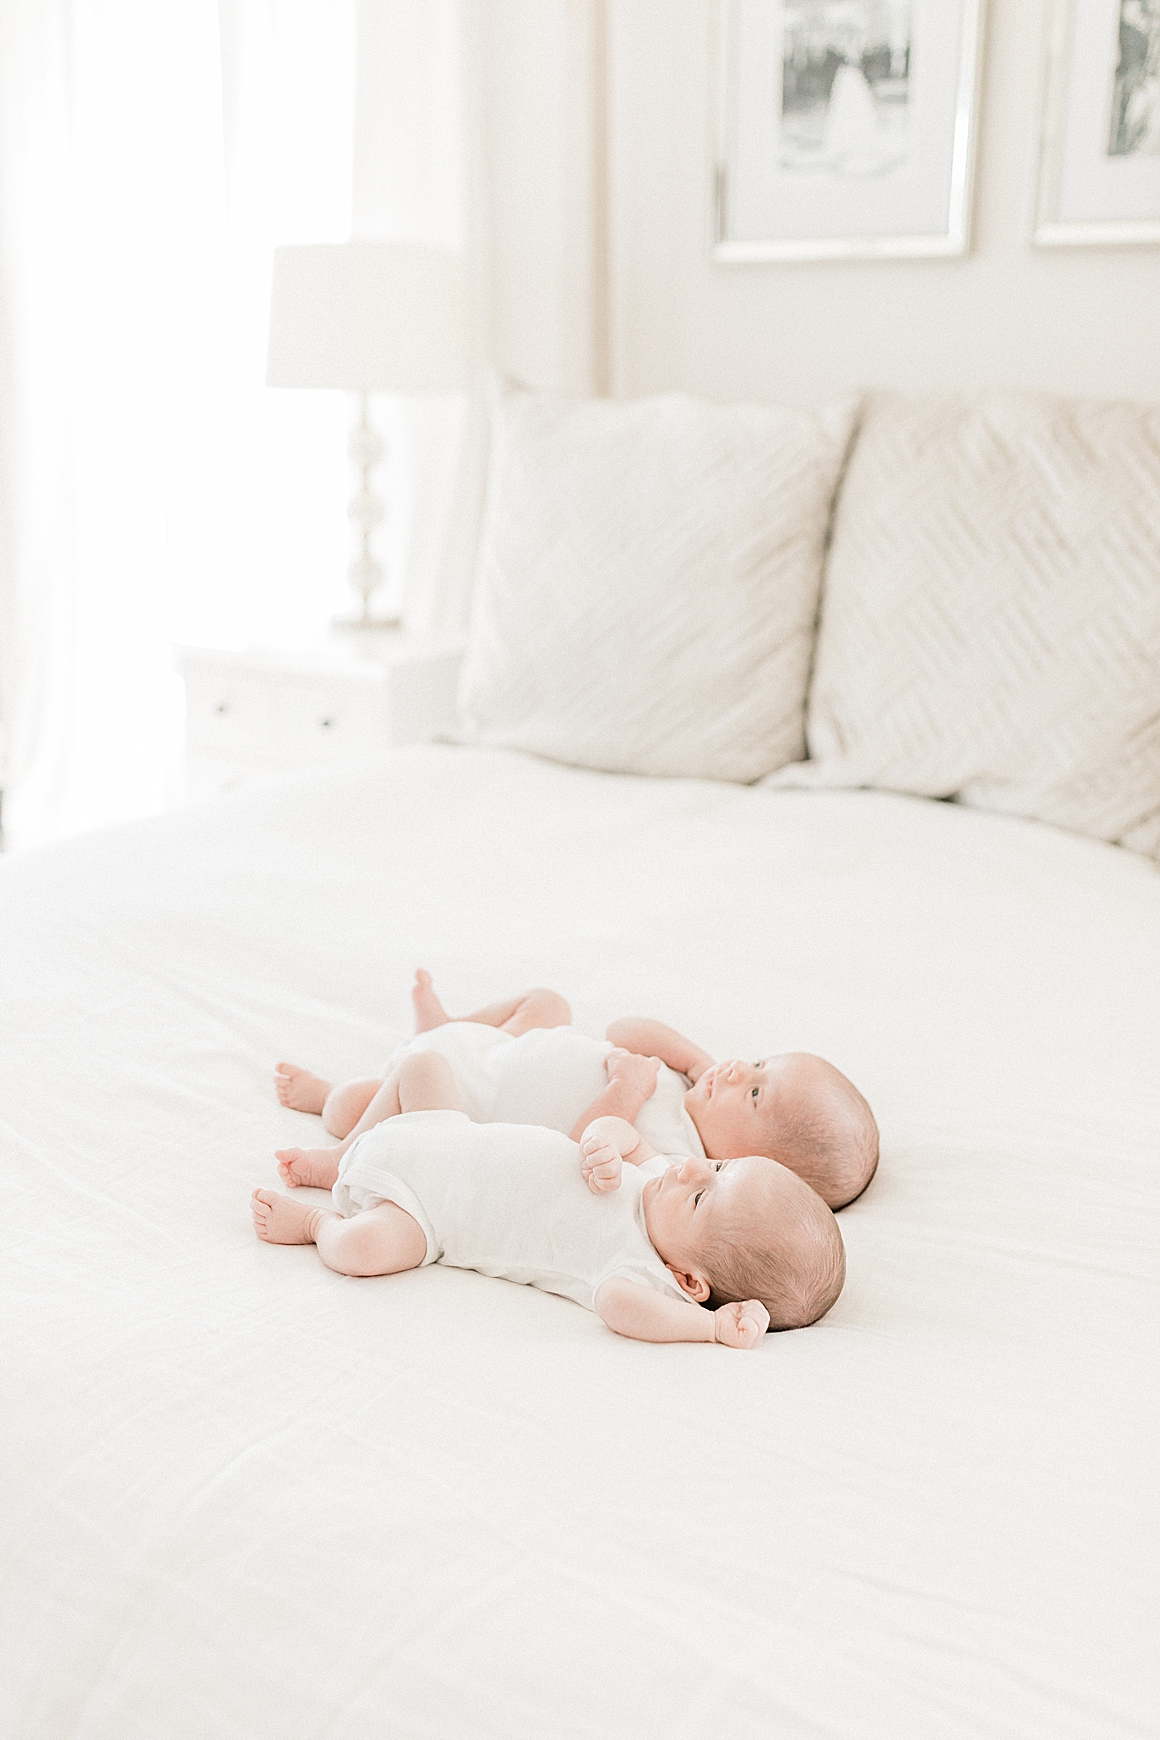 Twin boys laying on bed during lifestyle newborn session in Charleston, SC. Photos by Caitlyn Motycka Photography.